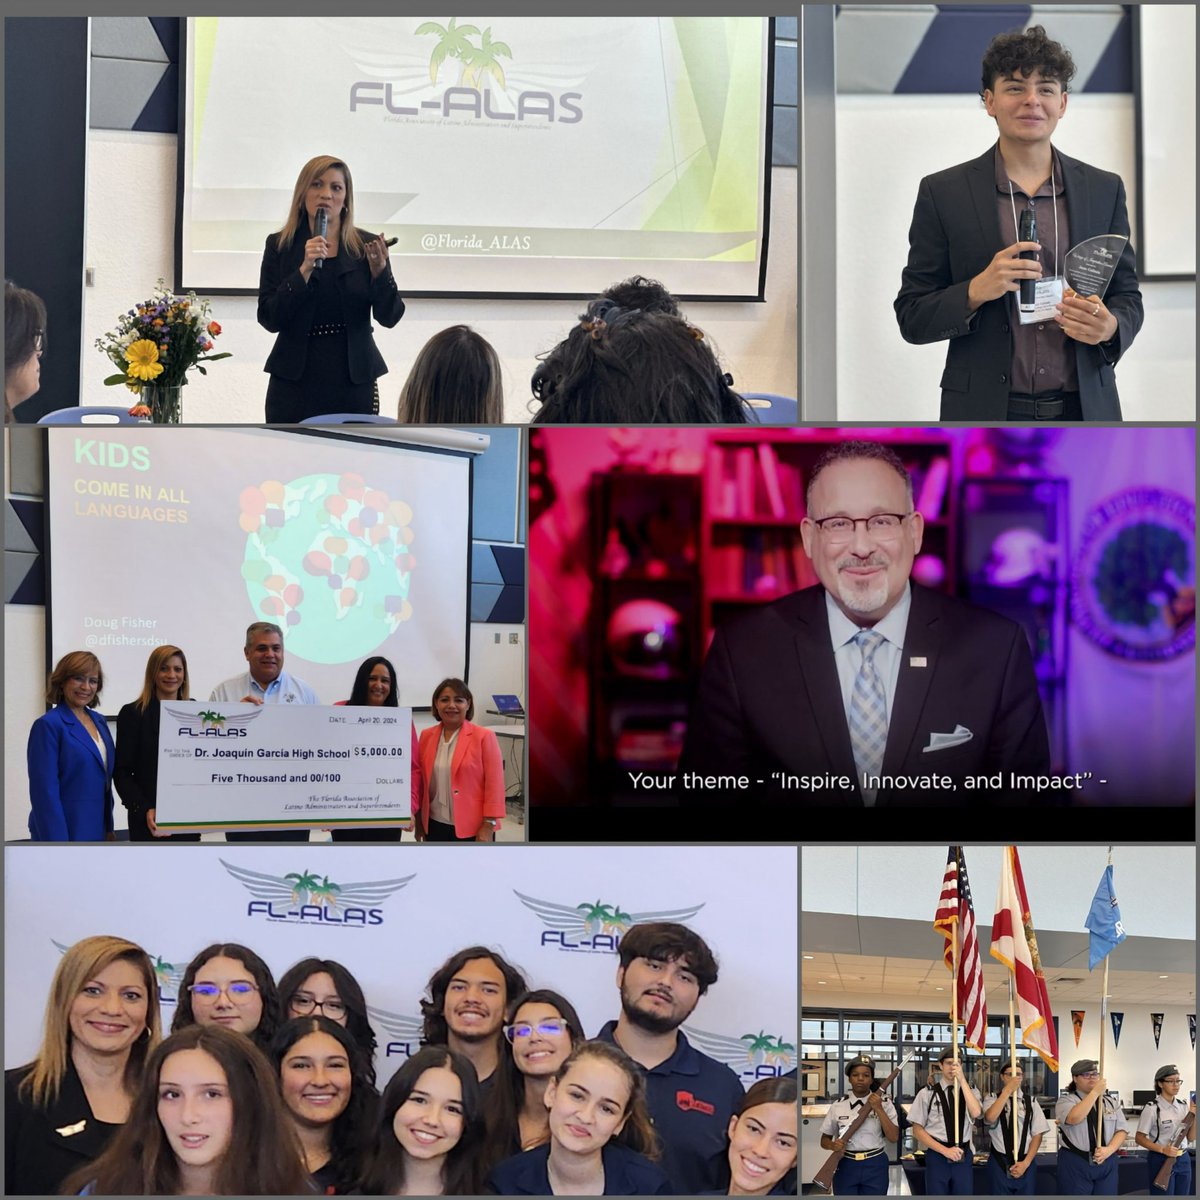 Loved our FL-ALAS conference theme #InspíraInnovateImpact! Ss continuously 𝗶𝗻𝘀𝗽𝗶𝗿𝗲 me to 𝗶𝗻𝗻𝗼𝘃𝗮𝘁𝗲 &strive for positive 𝗶𝗺𝗽𝗮𝗰𝘁 in their educational journeys. Gracias @DrGarciaHS @PrincipalOtero, Ss, speakers, presenters, & sponsors for a successful conference!